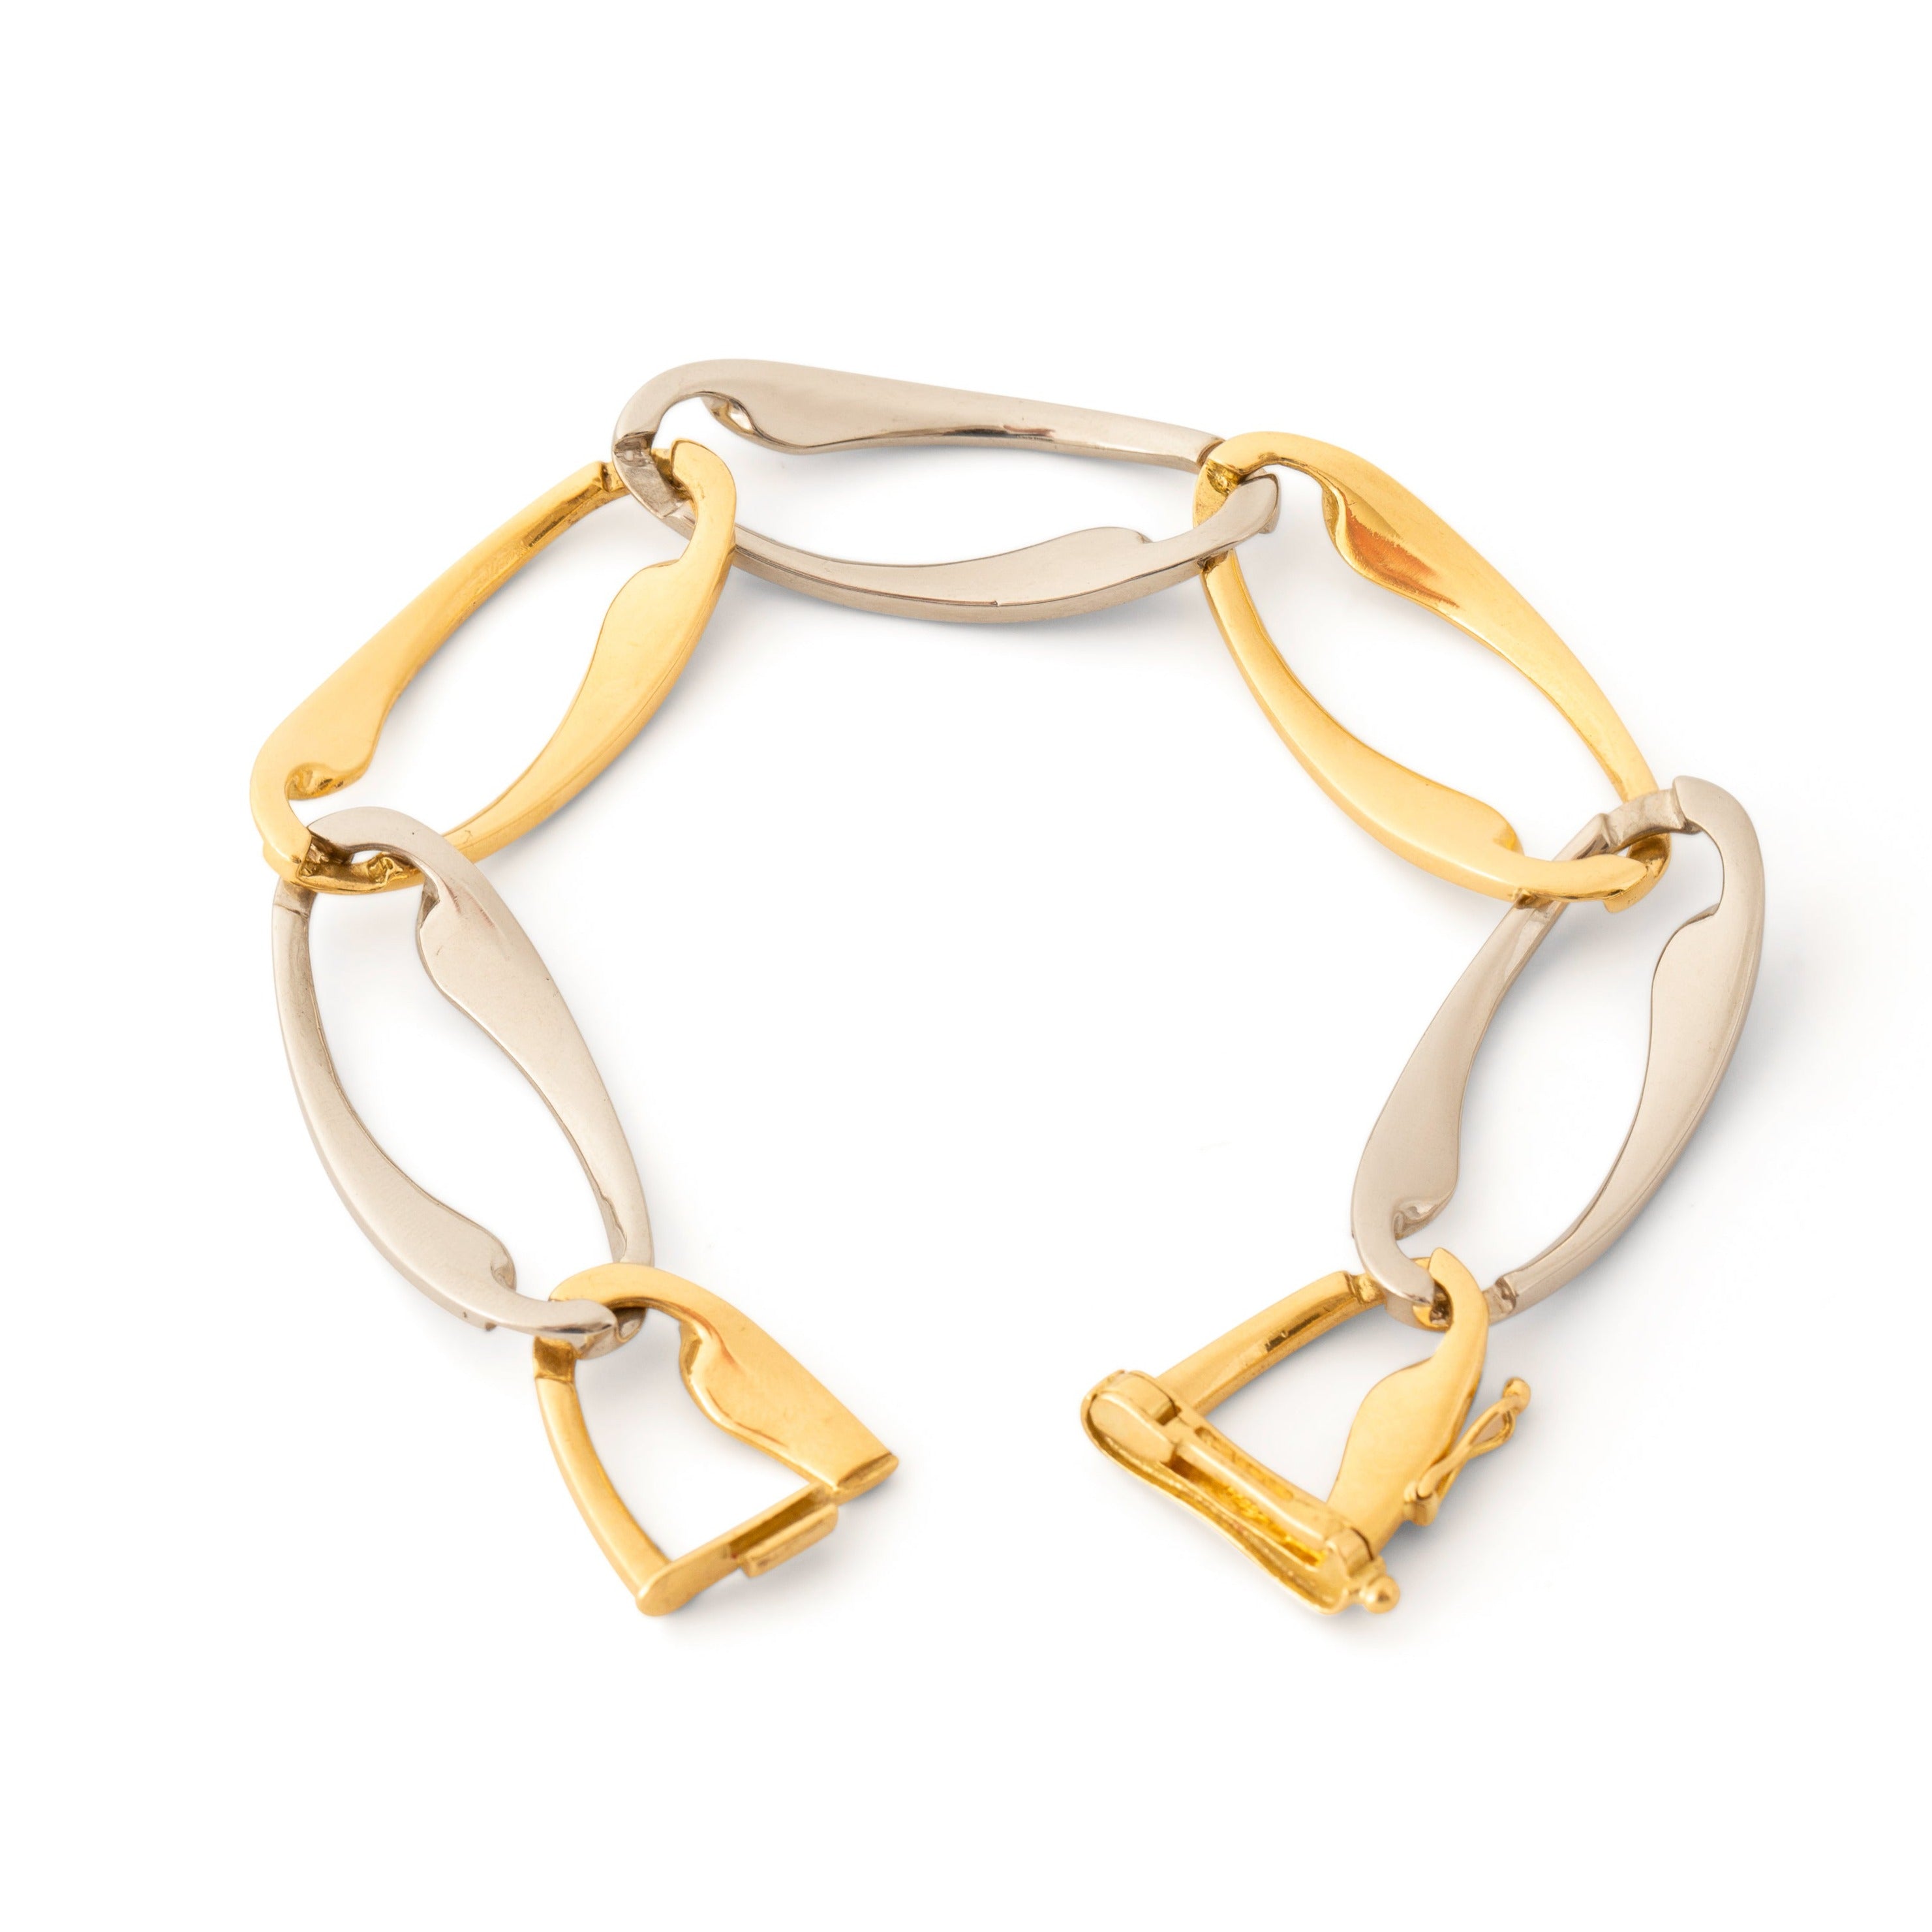 Two-Tone Yellow and White 18k Gold Large Link Bracelet